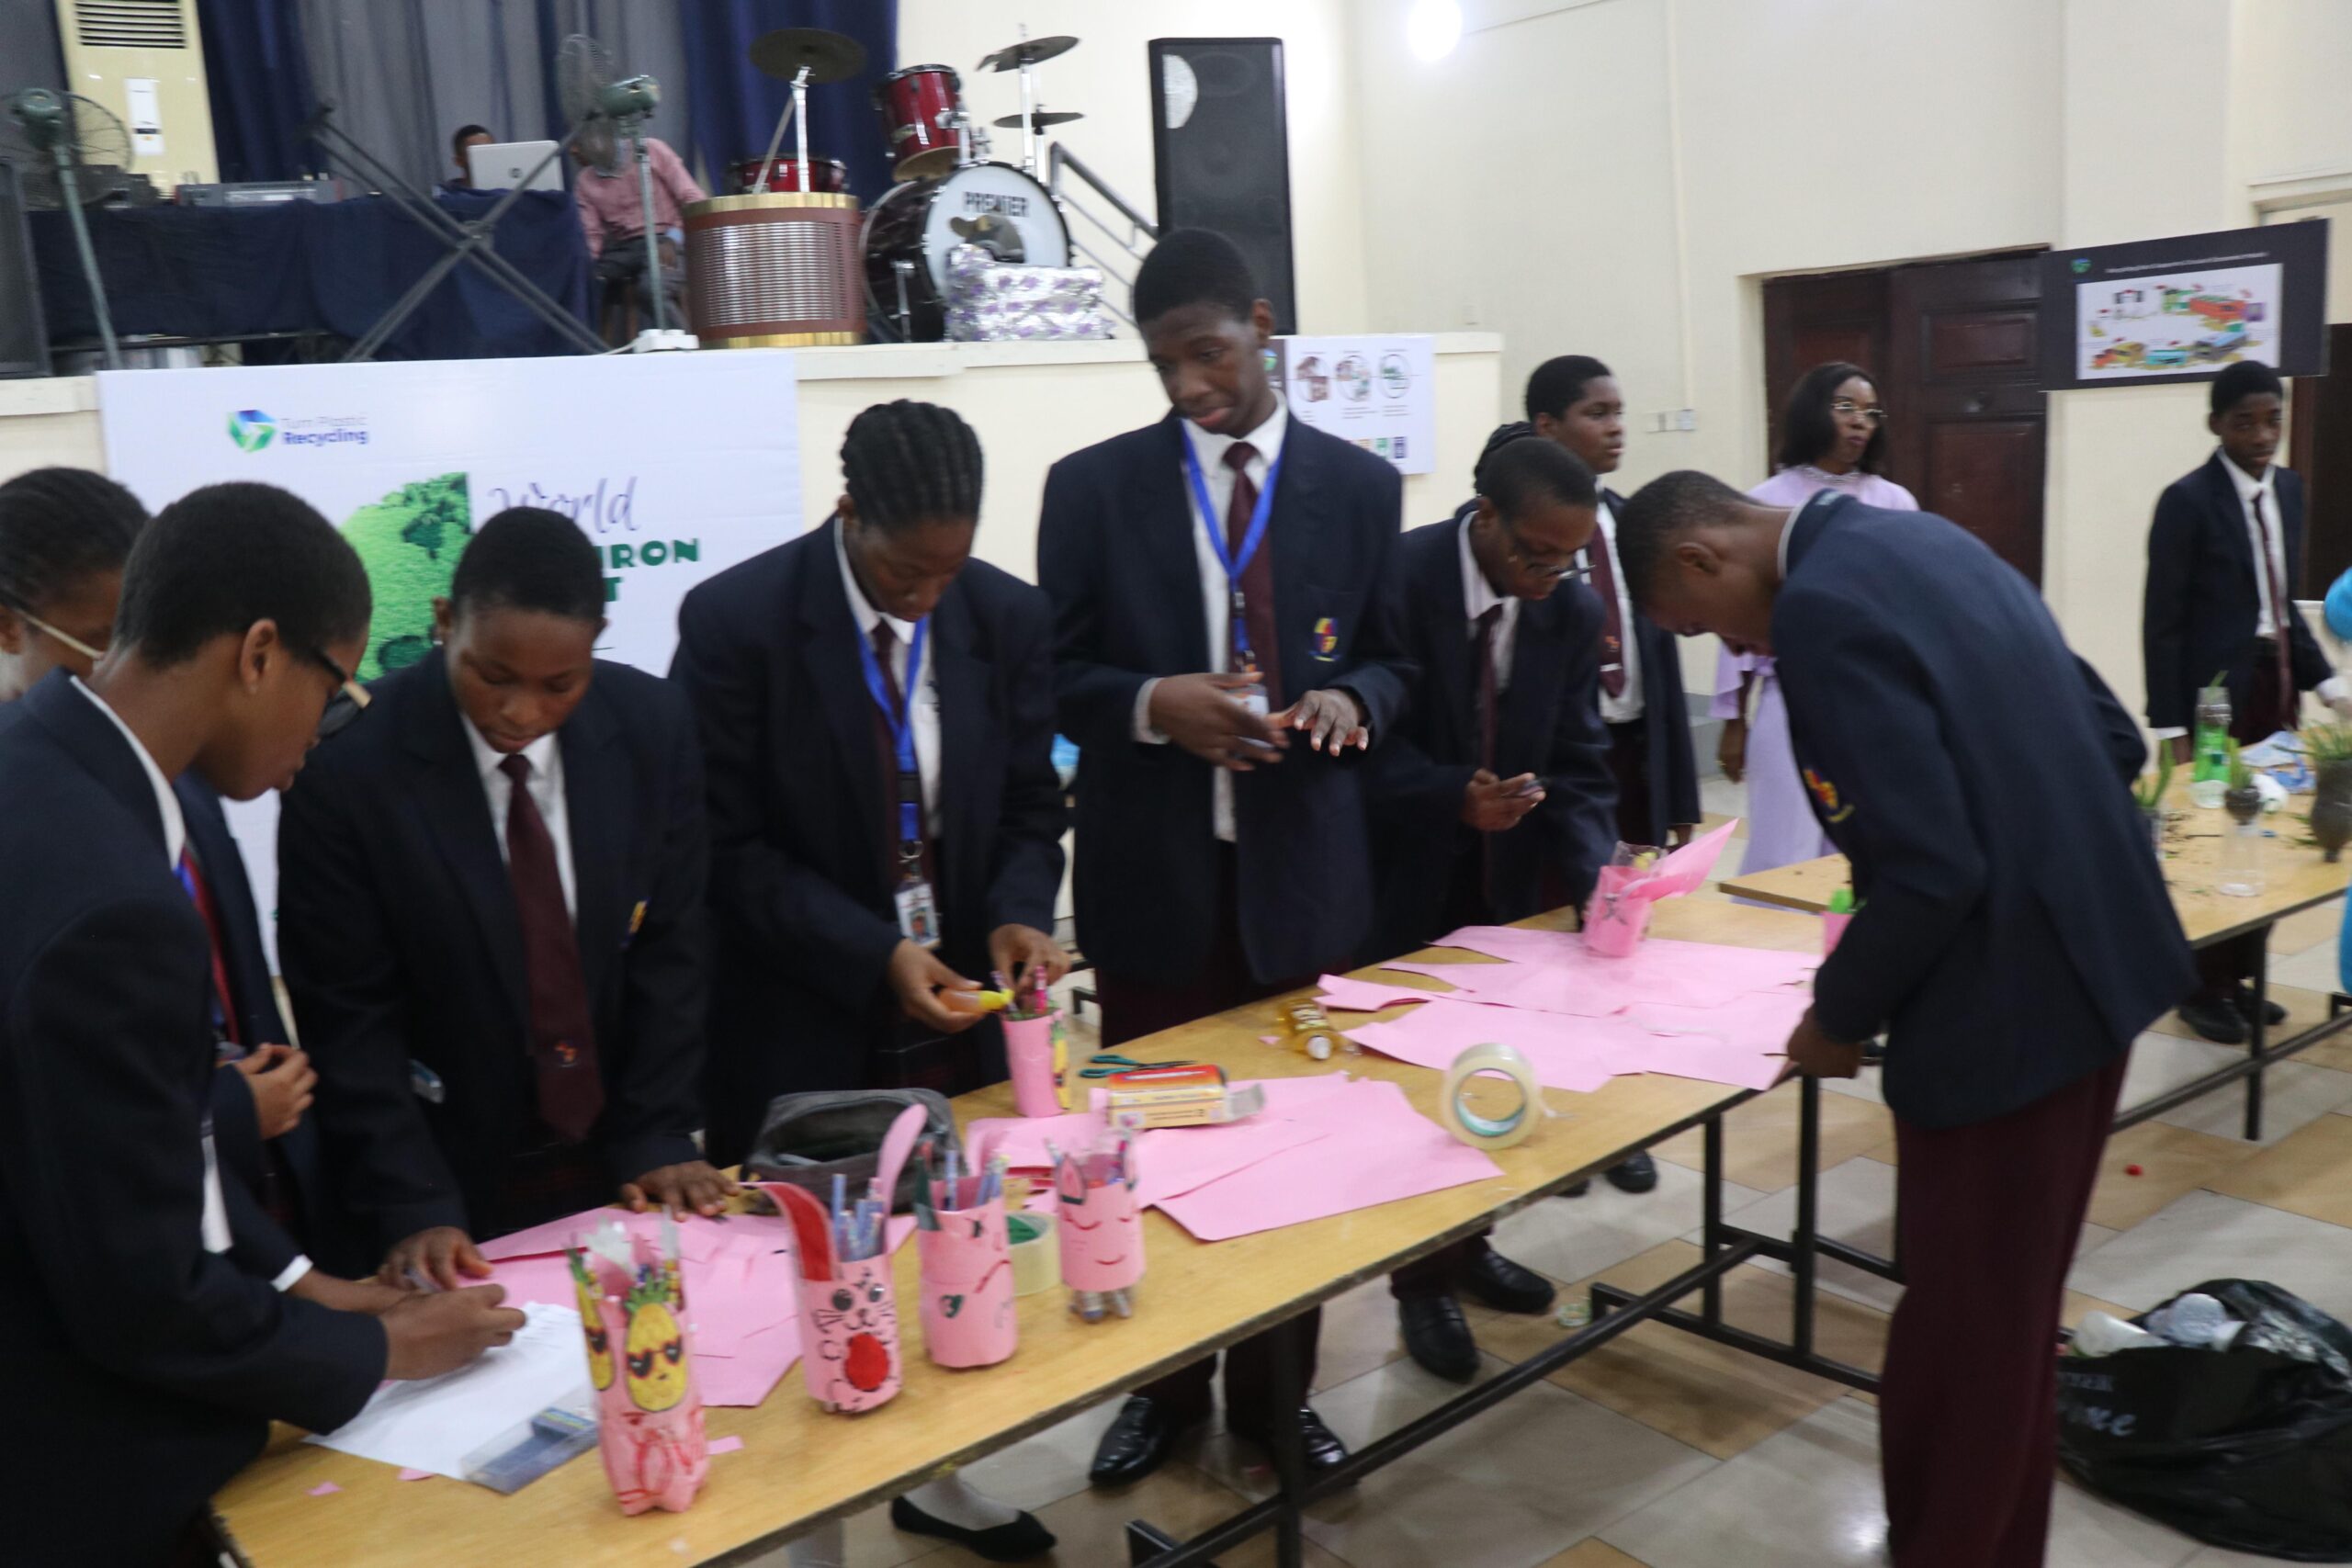 Port harcourt: Foundation Sensitizes Students on Waste Recycling, Launches Club